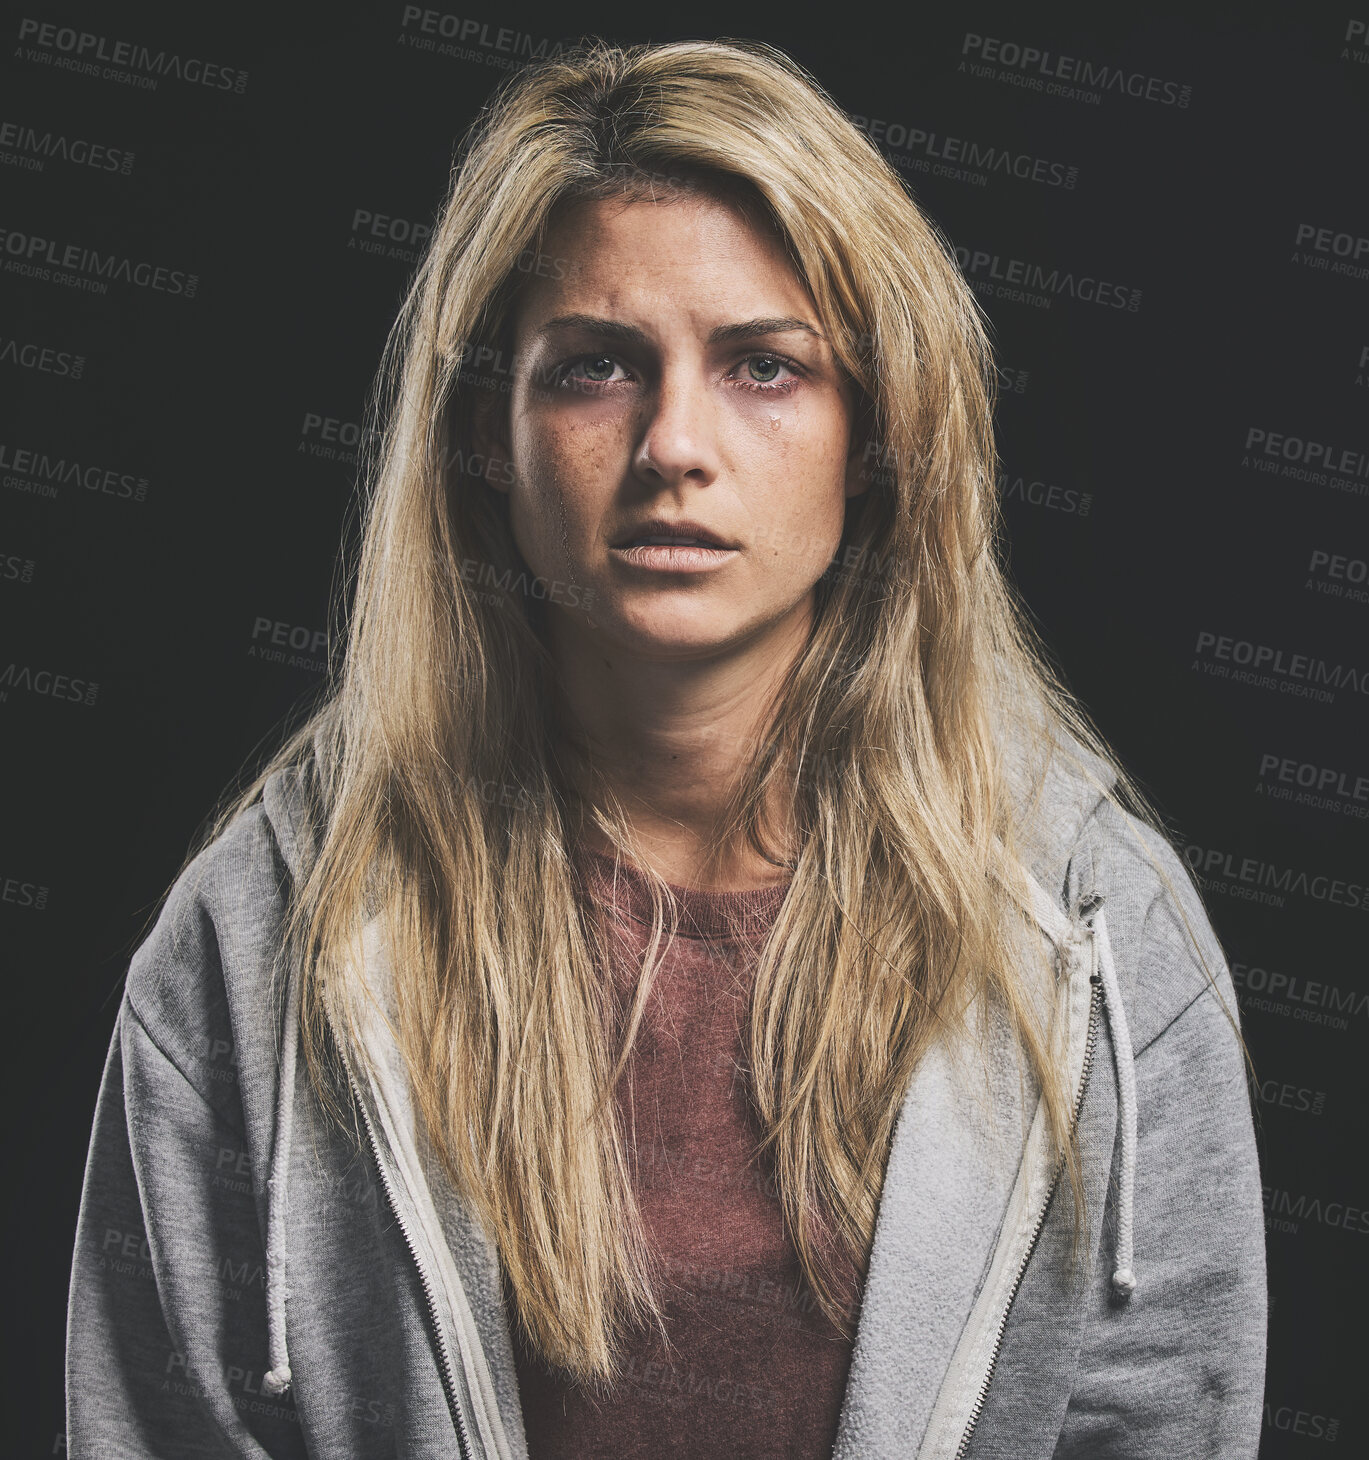 Buy stock photo Portrait of woman with dark mental health, drugs addiction or depression over alcohol problem, life mistake or bad lifestyle. Anxiety, cocaine rehabilitation or sad depressed girl on black background